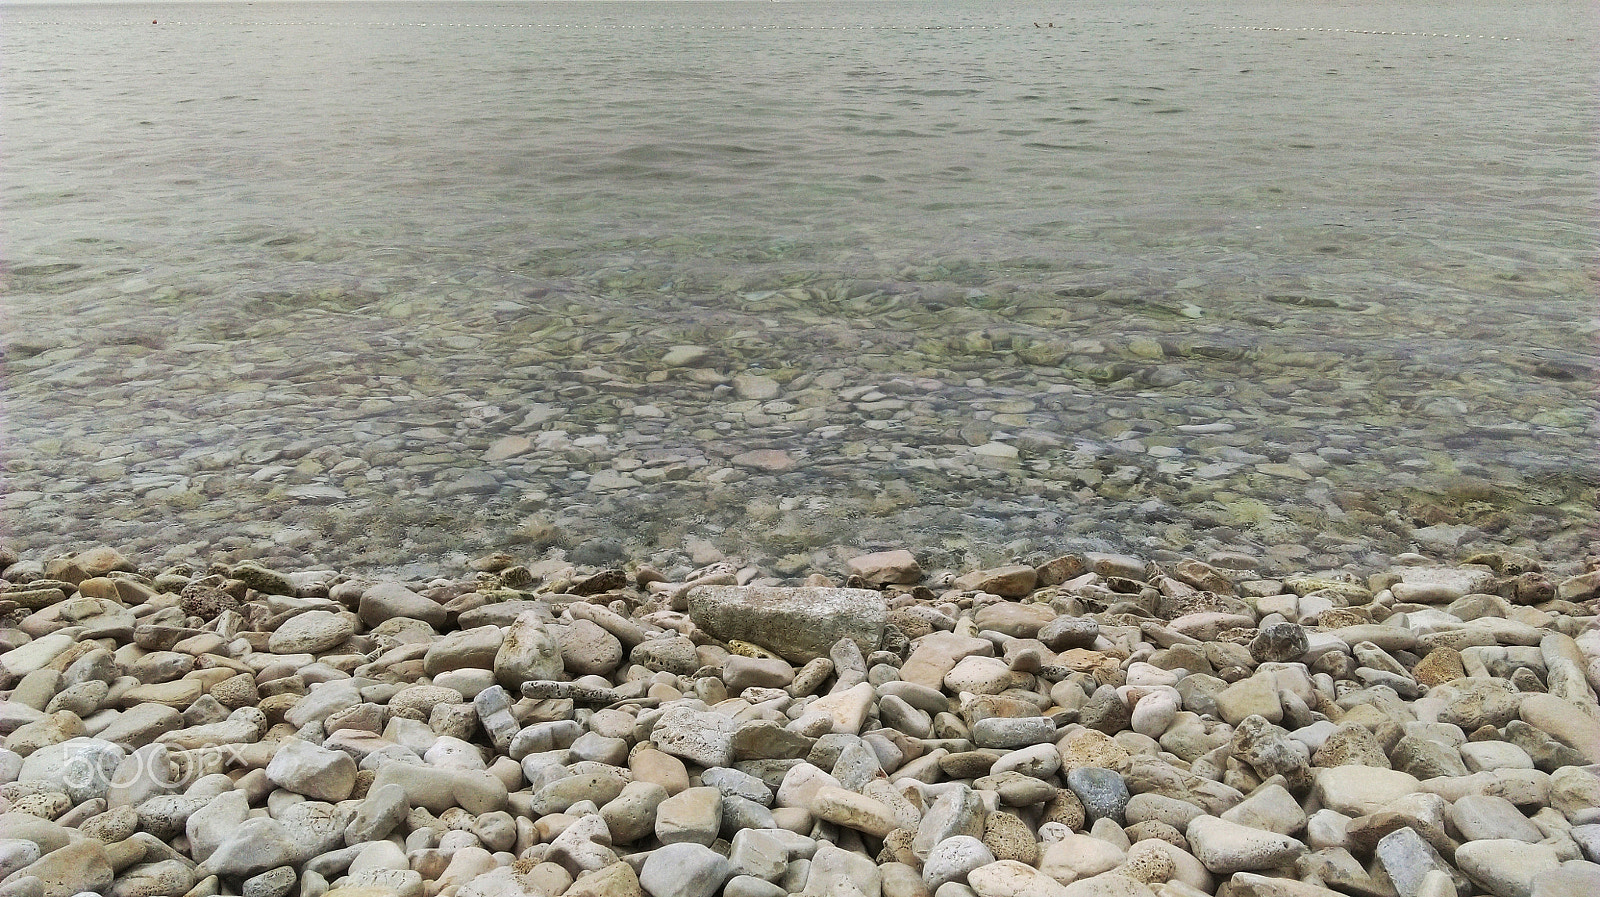 HTC DESIRE 826 DUAL SIM sample photo. The beach with colorful pebbles and a bustling ocean photography